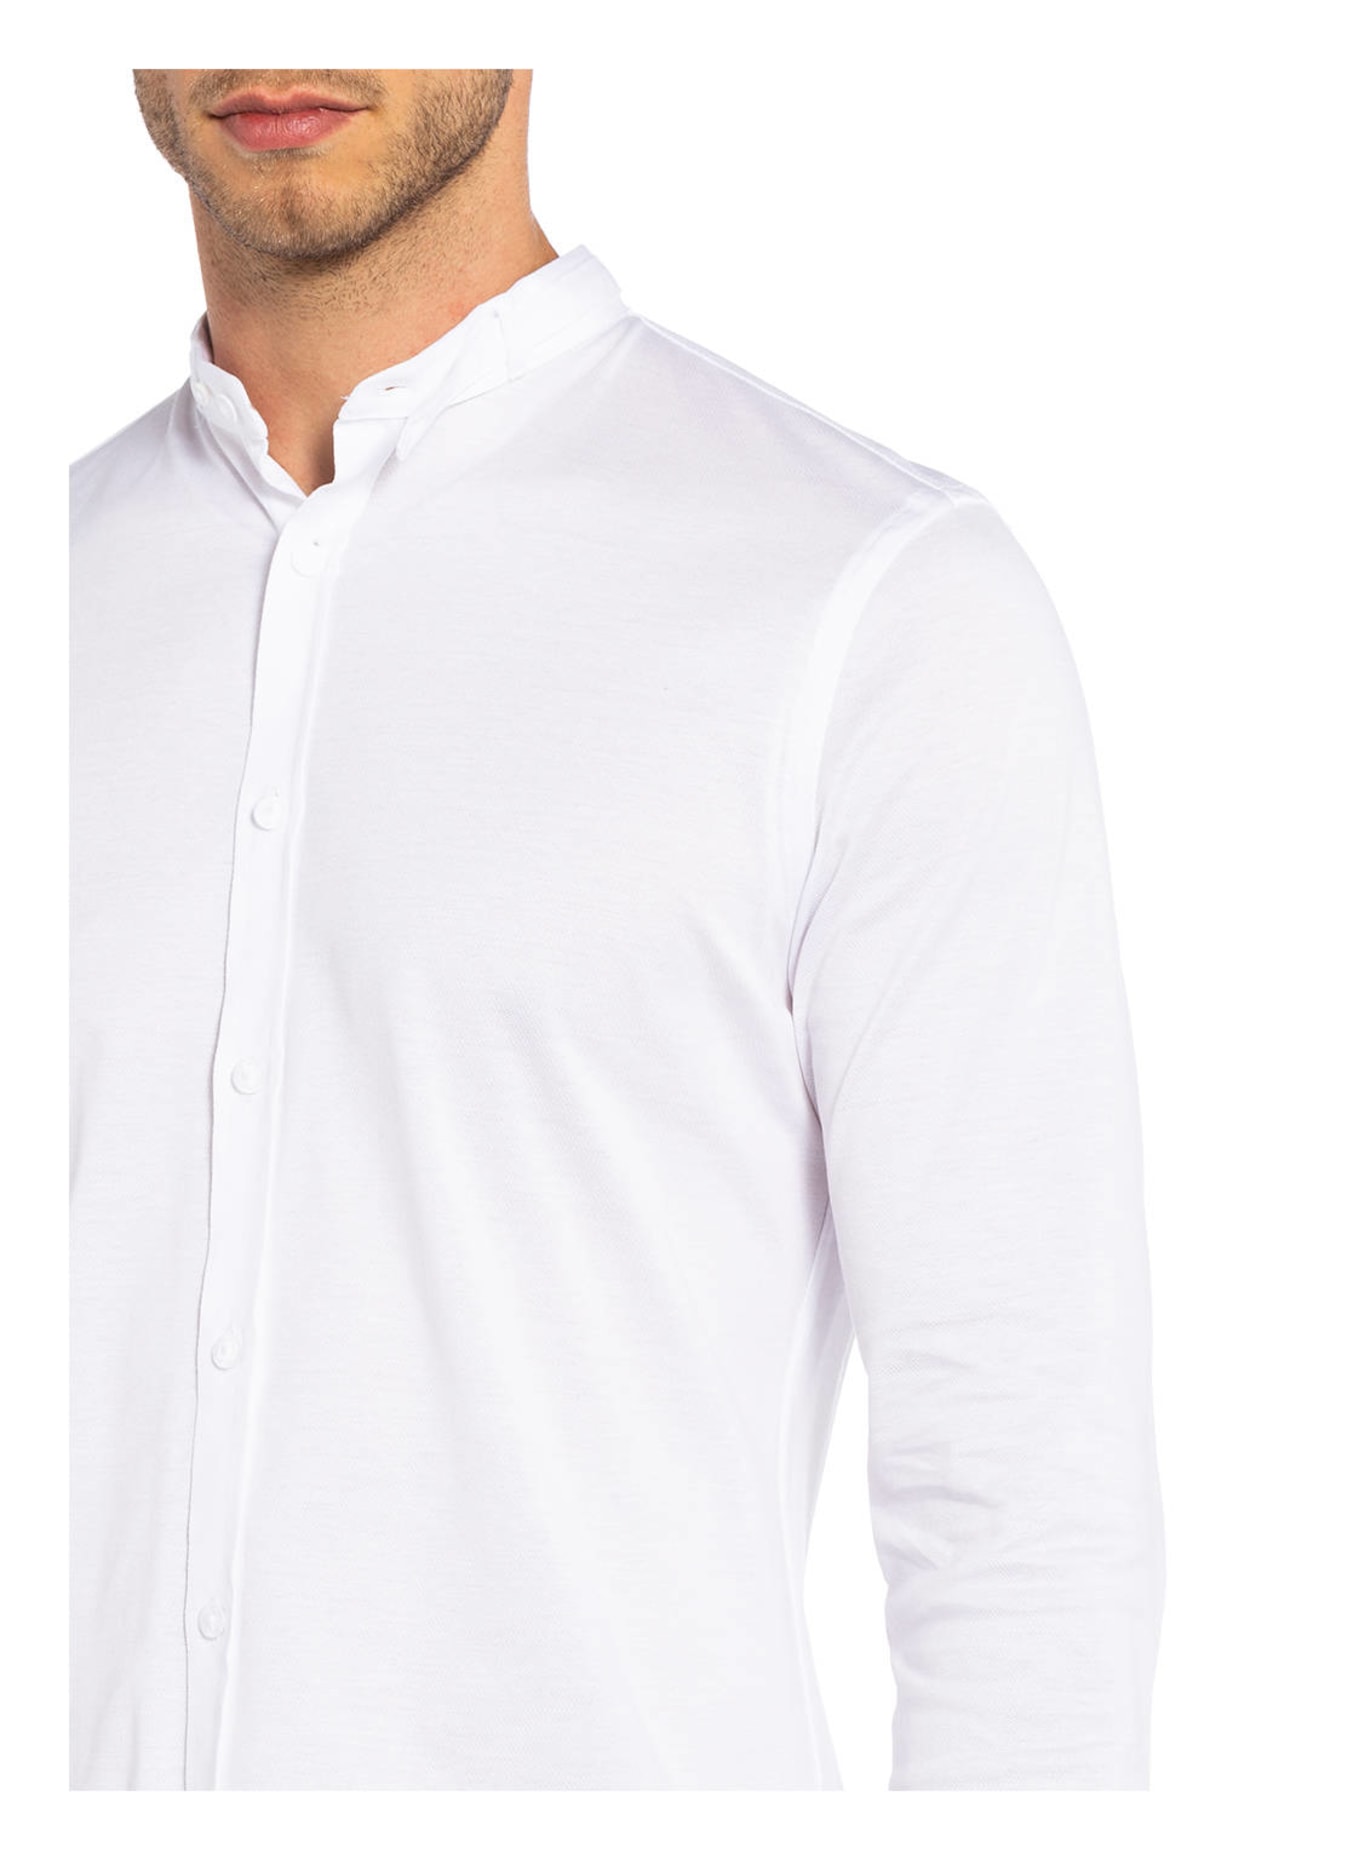 Gottseidank Trachten shirt LENZ extra slim fit with stand-up collar, Color: WHITE (Image 4)